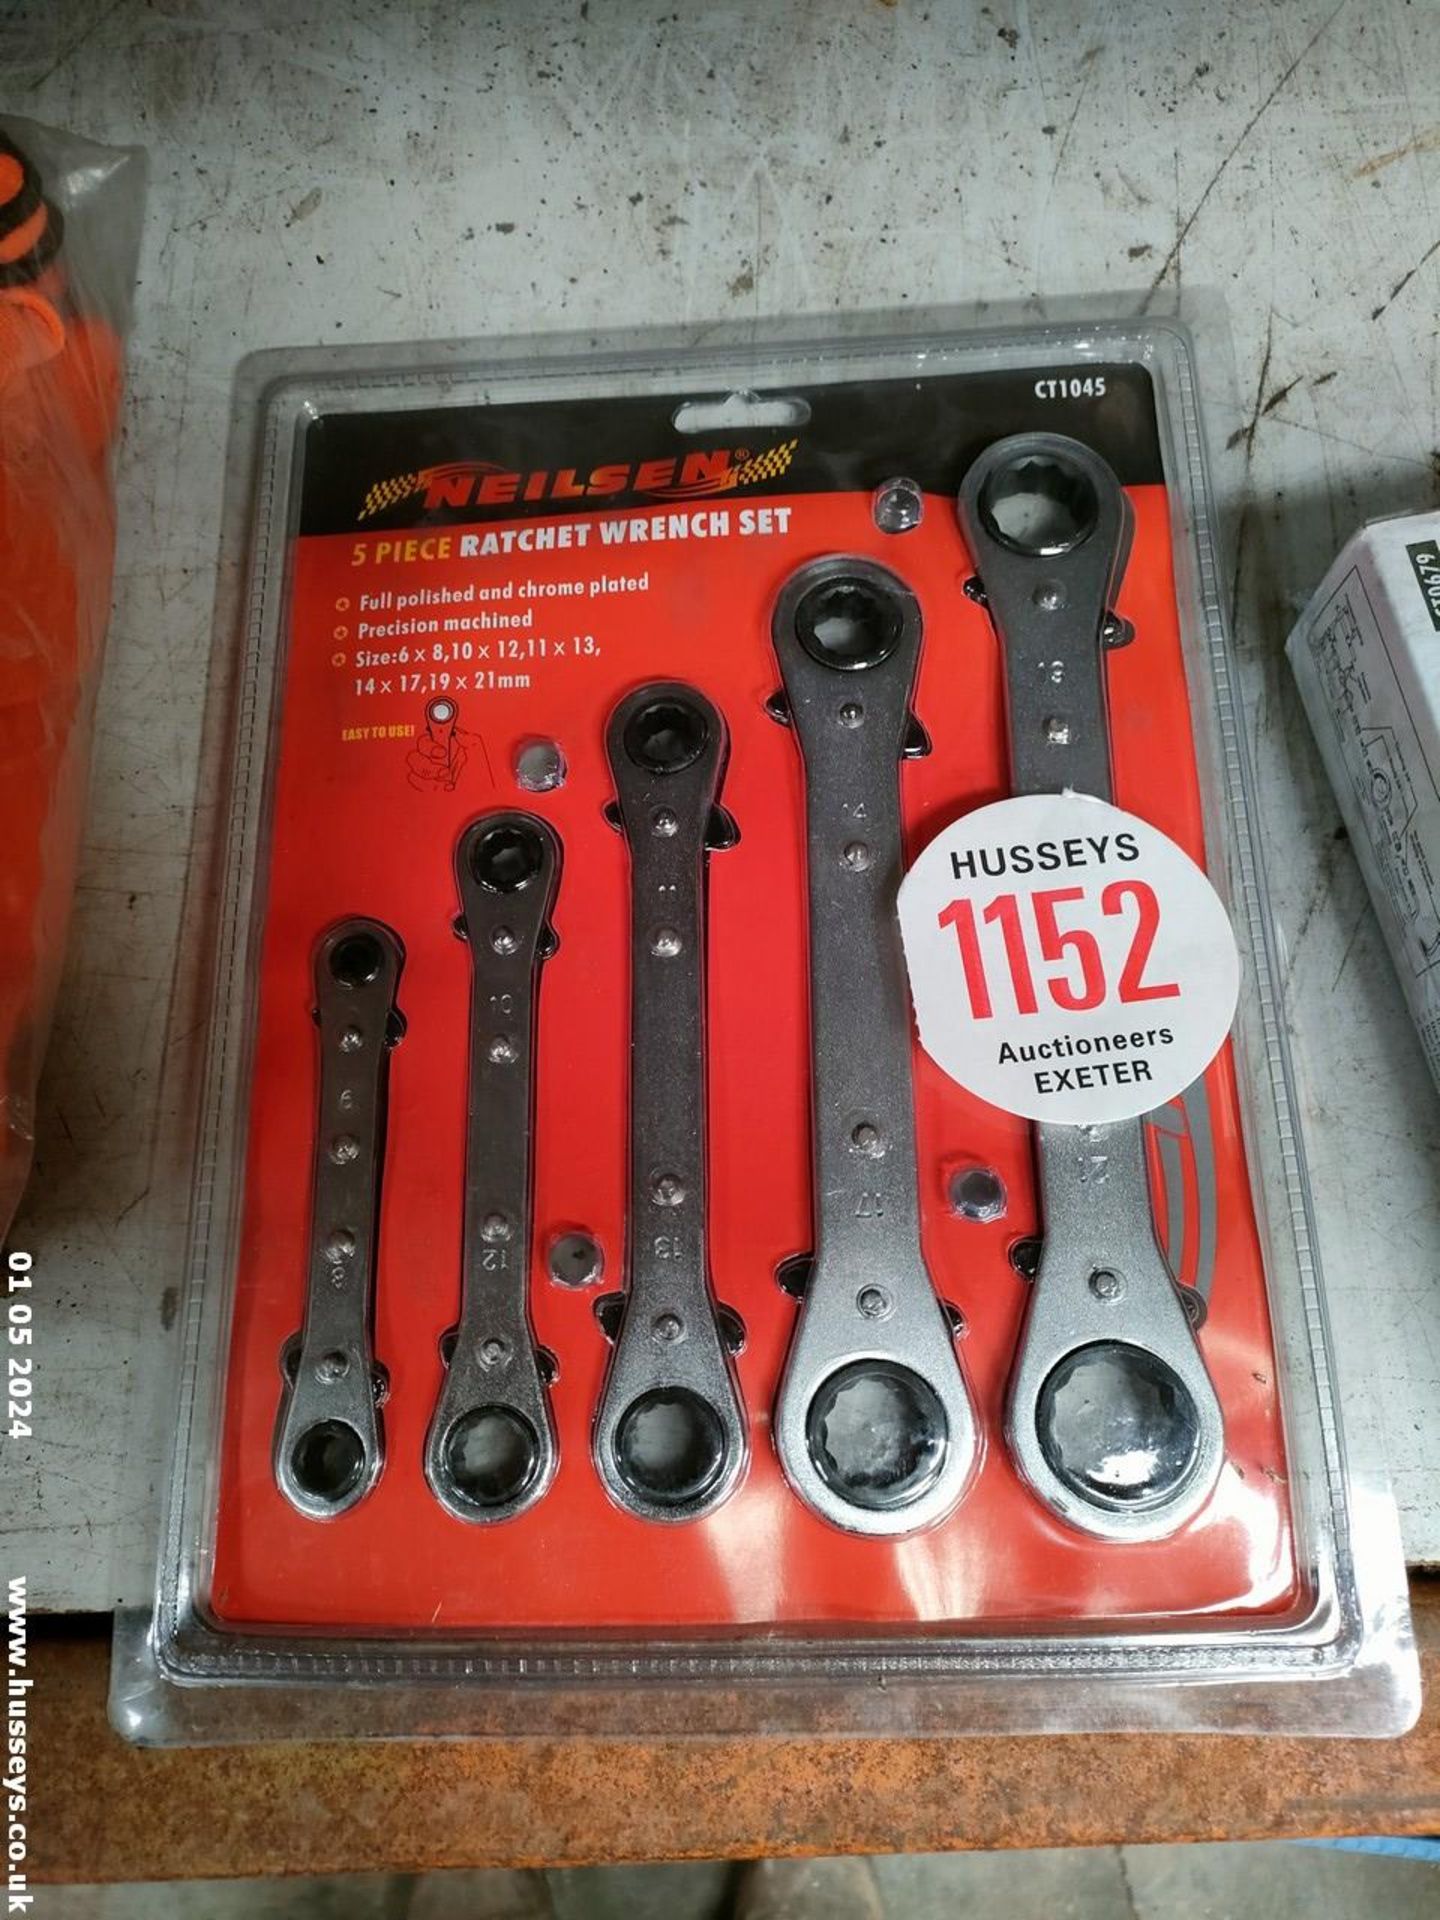 RATCHET WRENCH